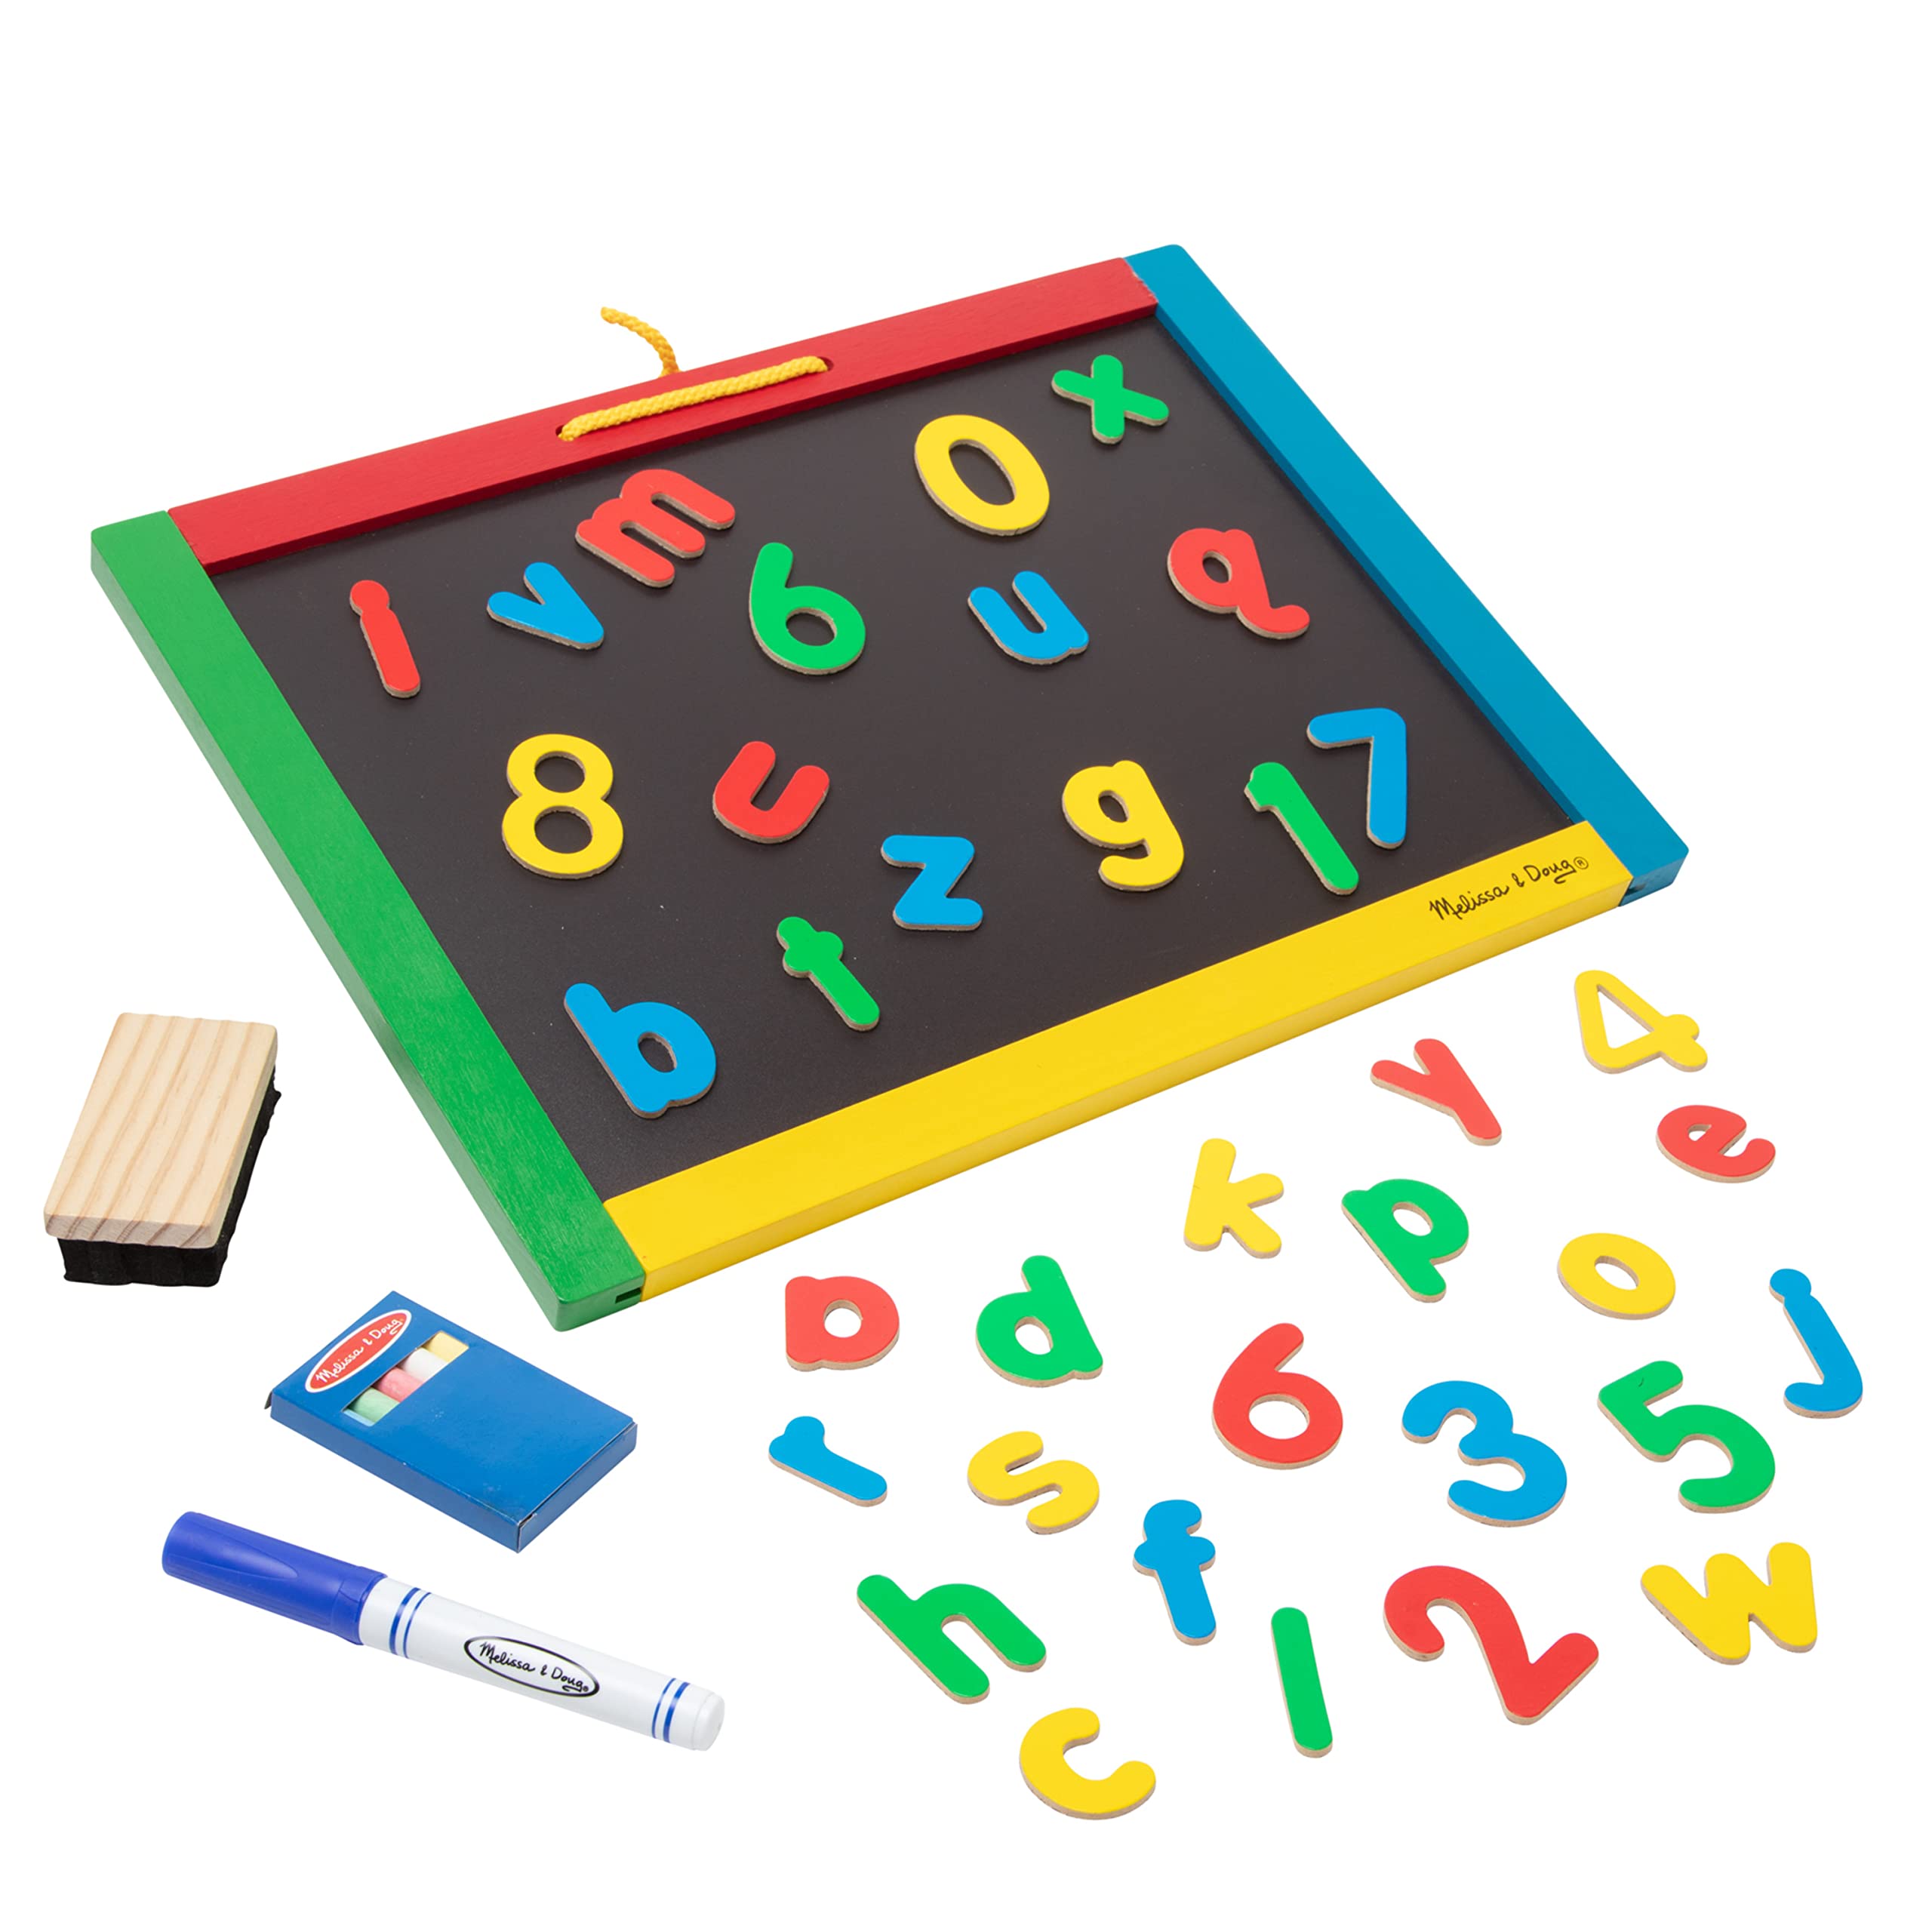 Melissa & Doug Magnetic Chalkboard and Dry-Erase Board With 36 Magnets, Chalk, Eraser, and Dry-Erase Pen - Letters And Numbers Learning Toys, Chalk Board For Kids, Dry Erase Board For Kids Ages 3+